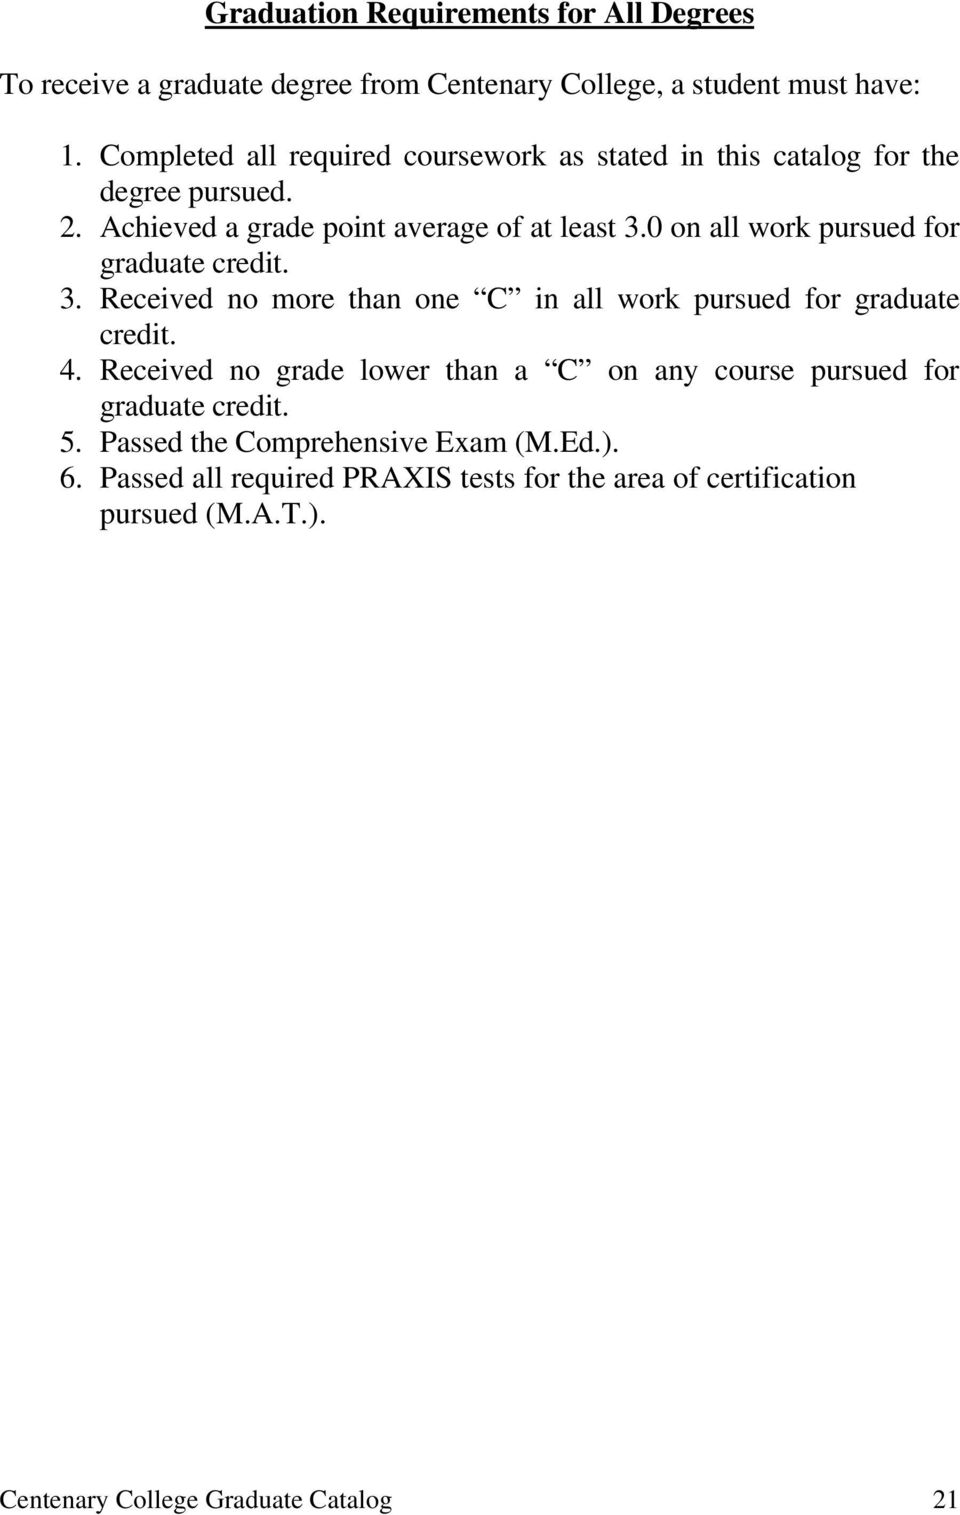 0 on all work pursued for graduate credit. 3. Received no more than one C in all work pursued for graduate credit. 4.